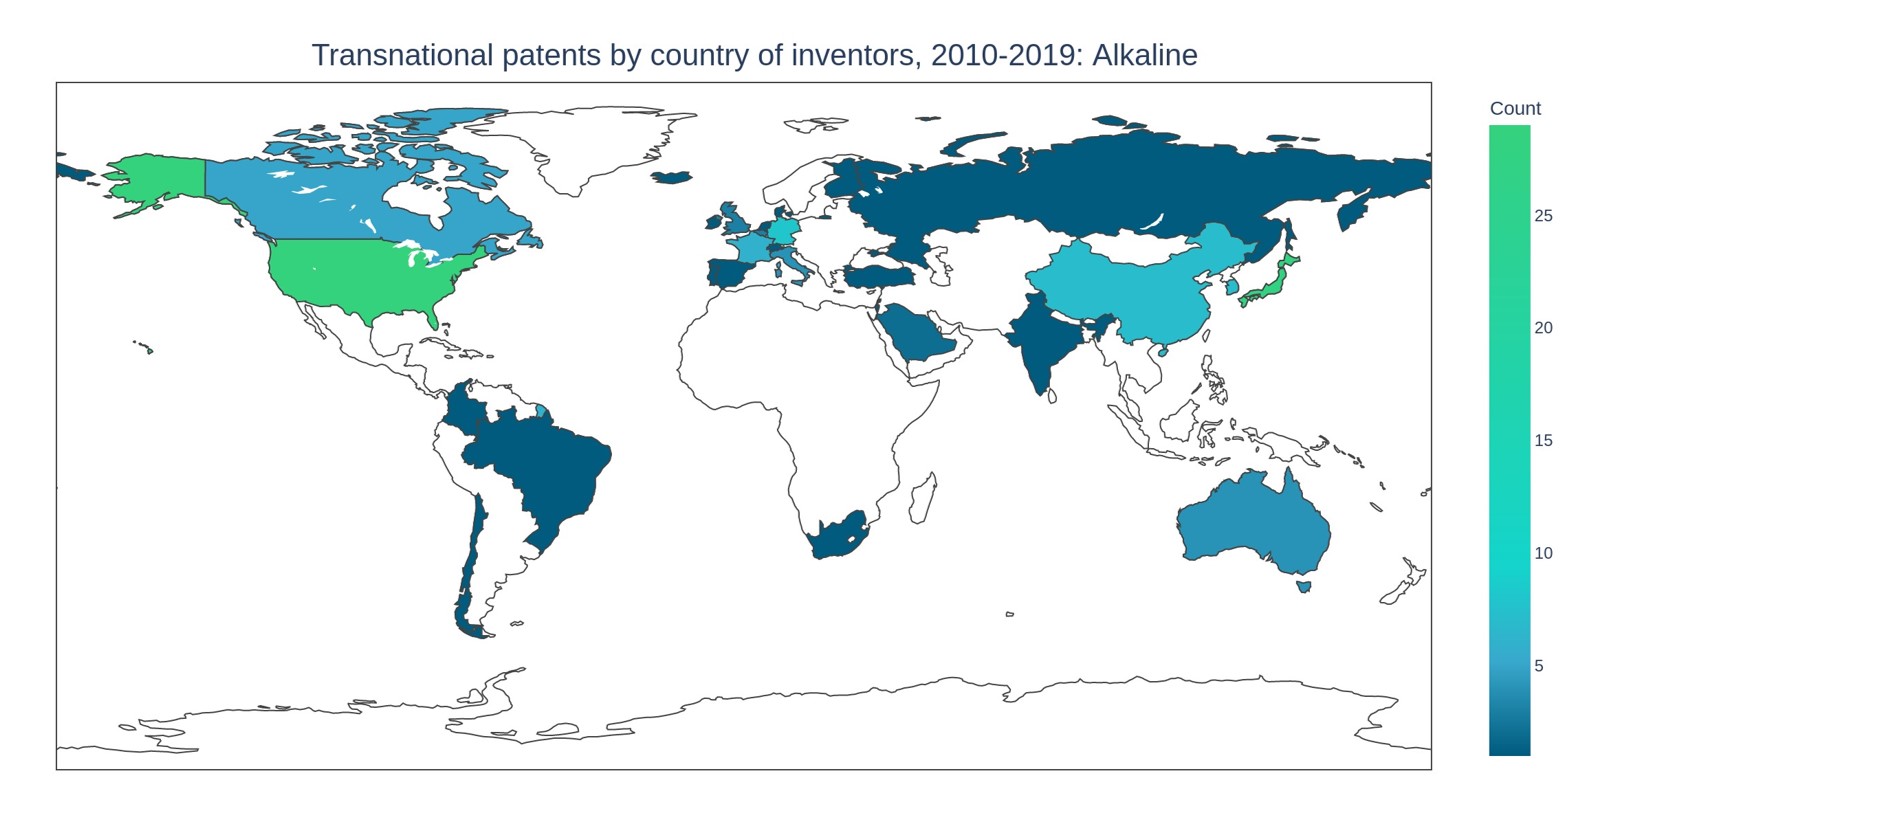 Figure 8: Distribution of transnational patents over countries for alkaline electrolysis (2010-2019).